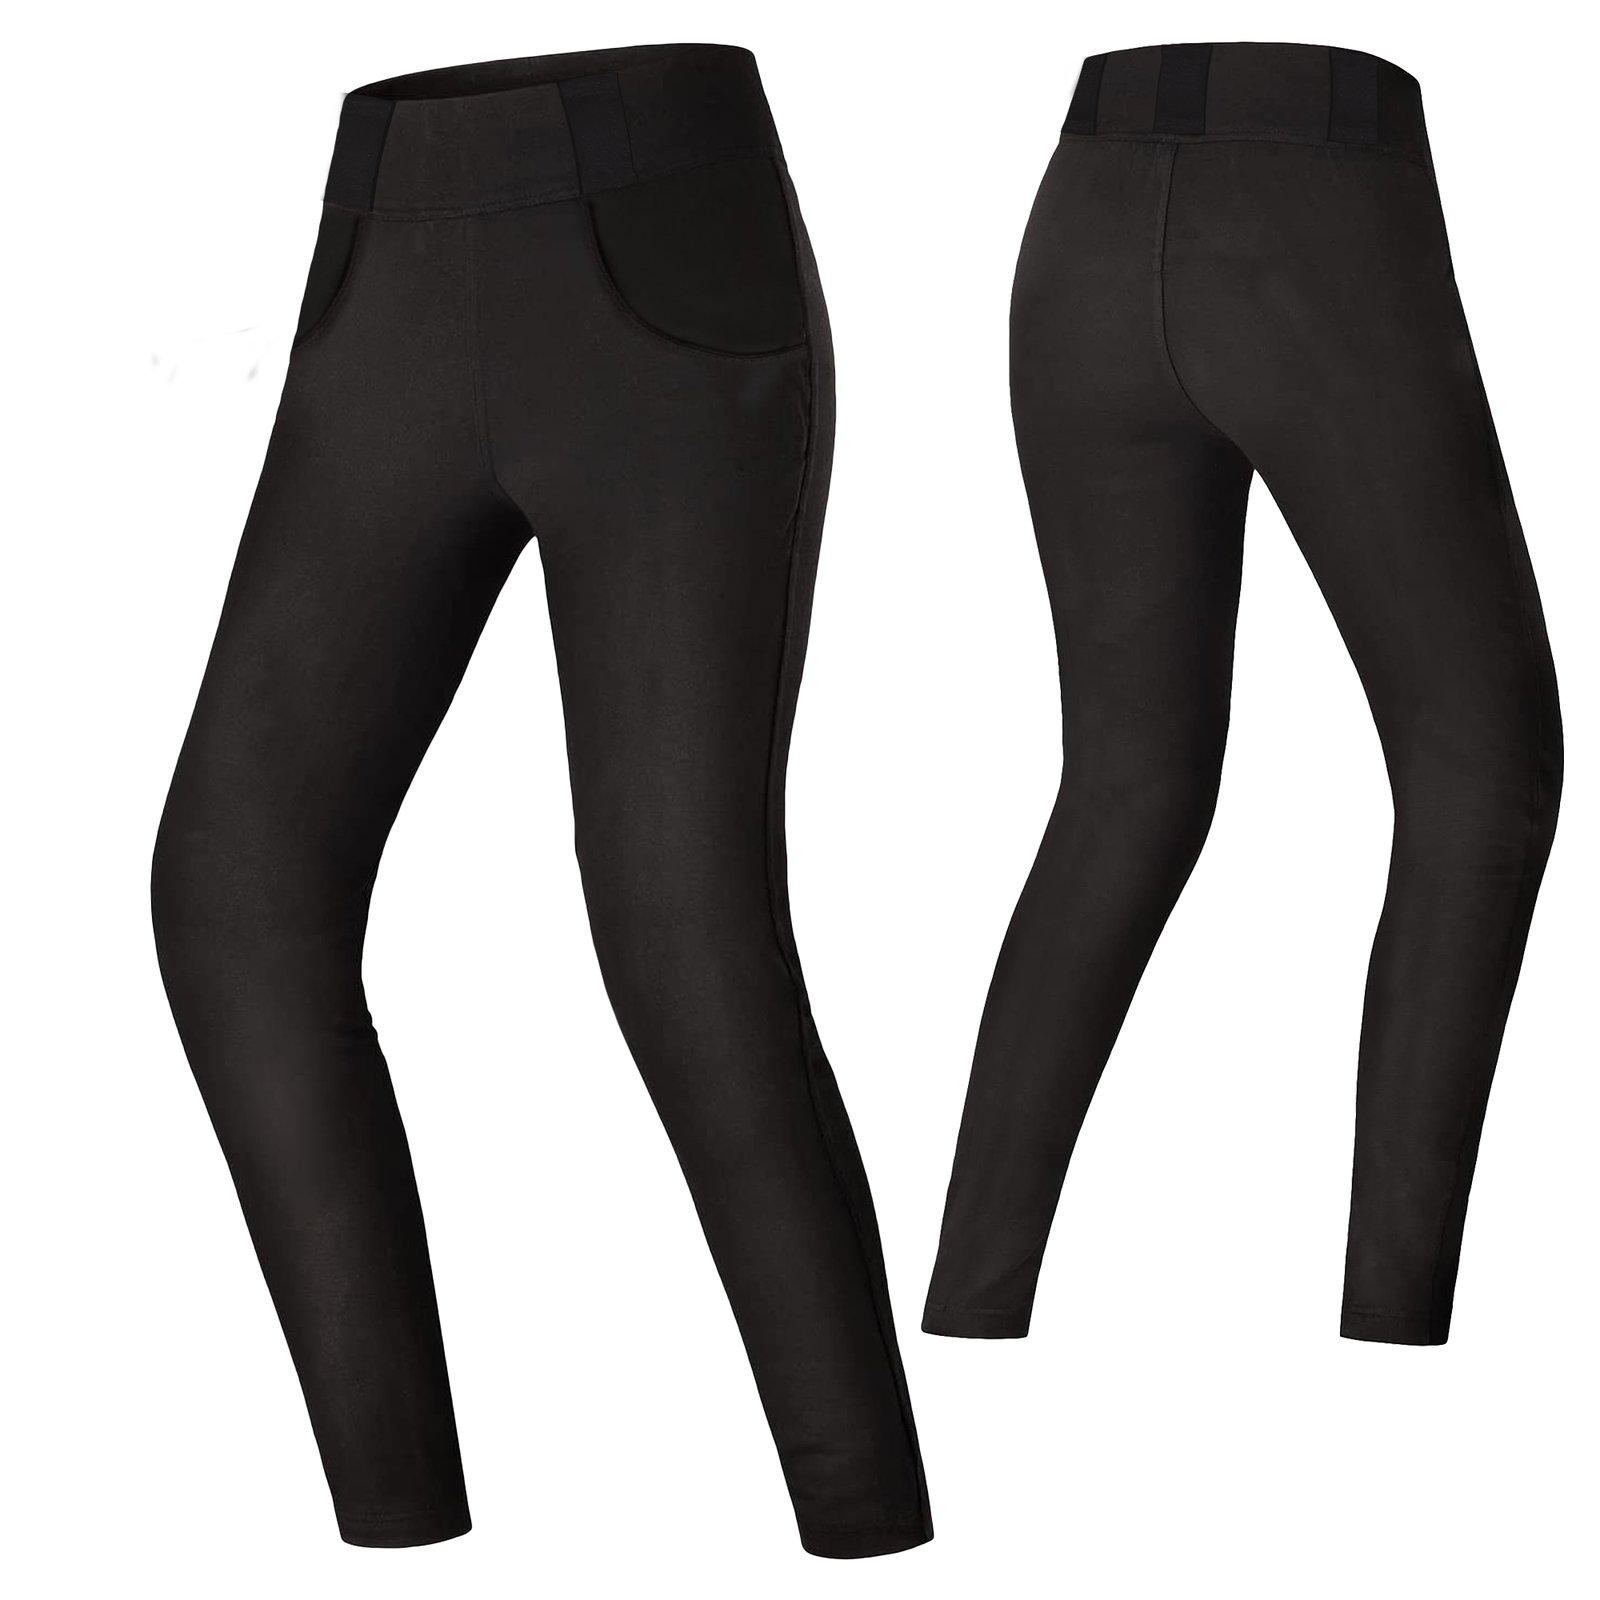 We reviewed Spanx bestselling leggings. These are our favorites